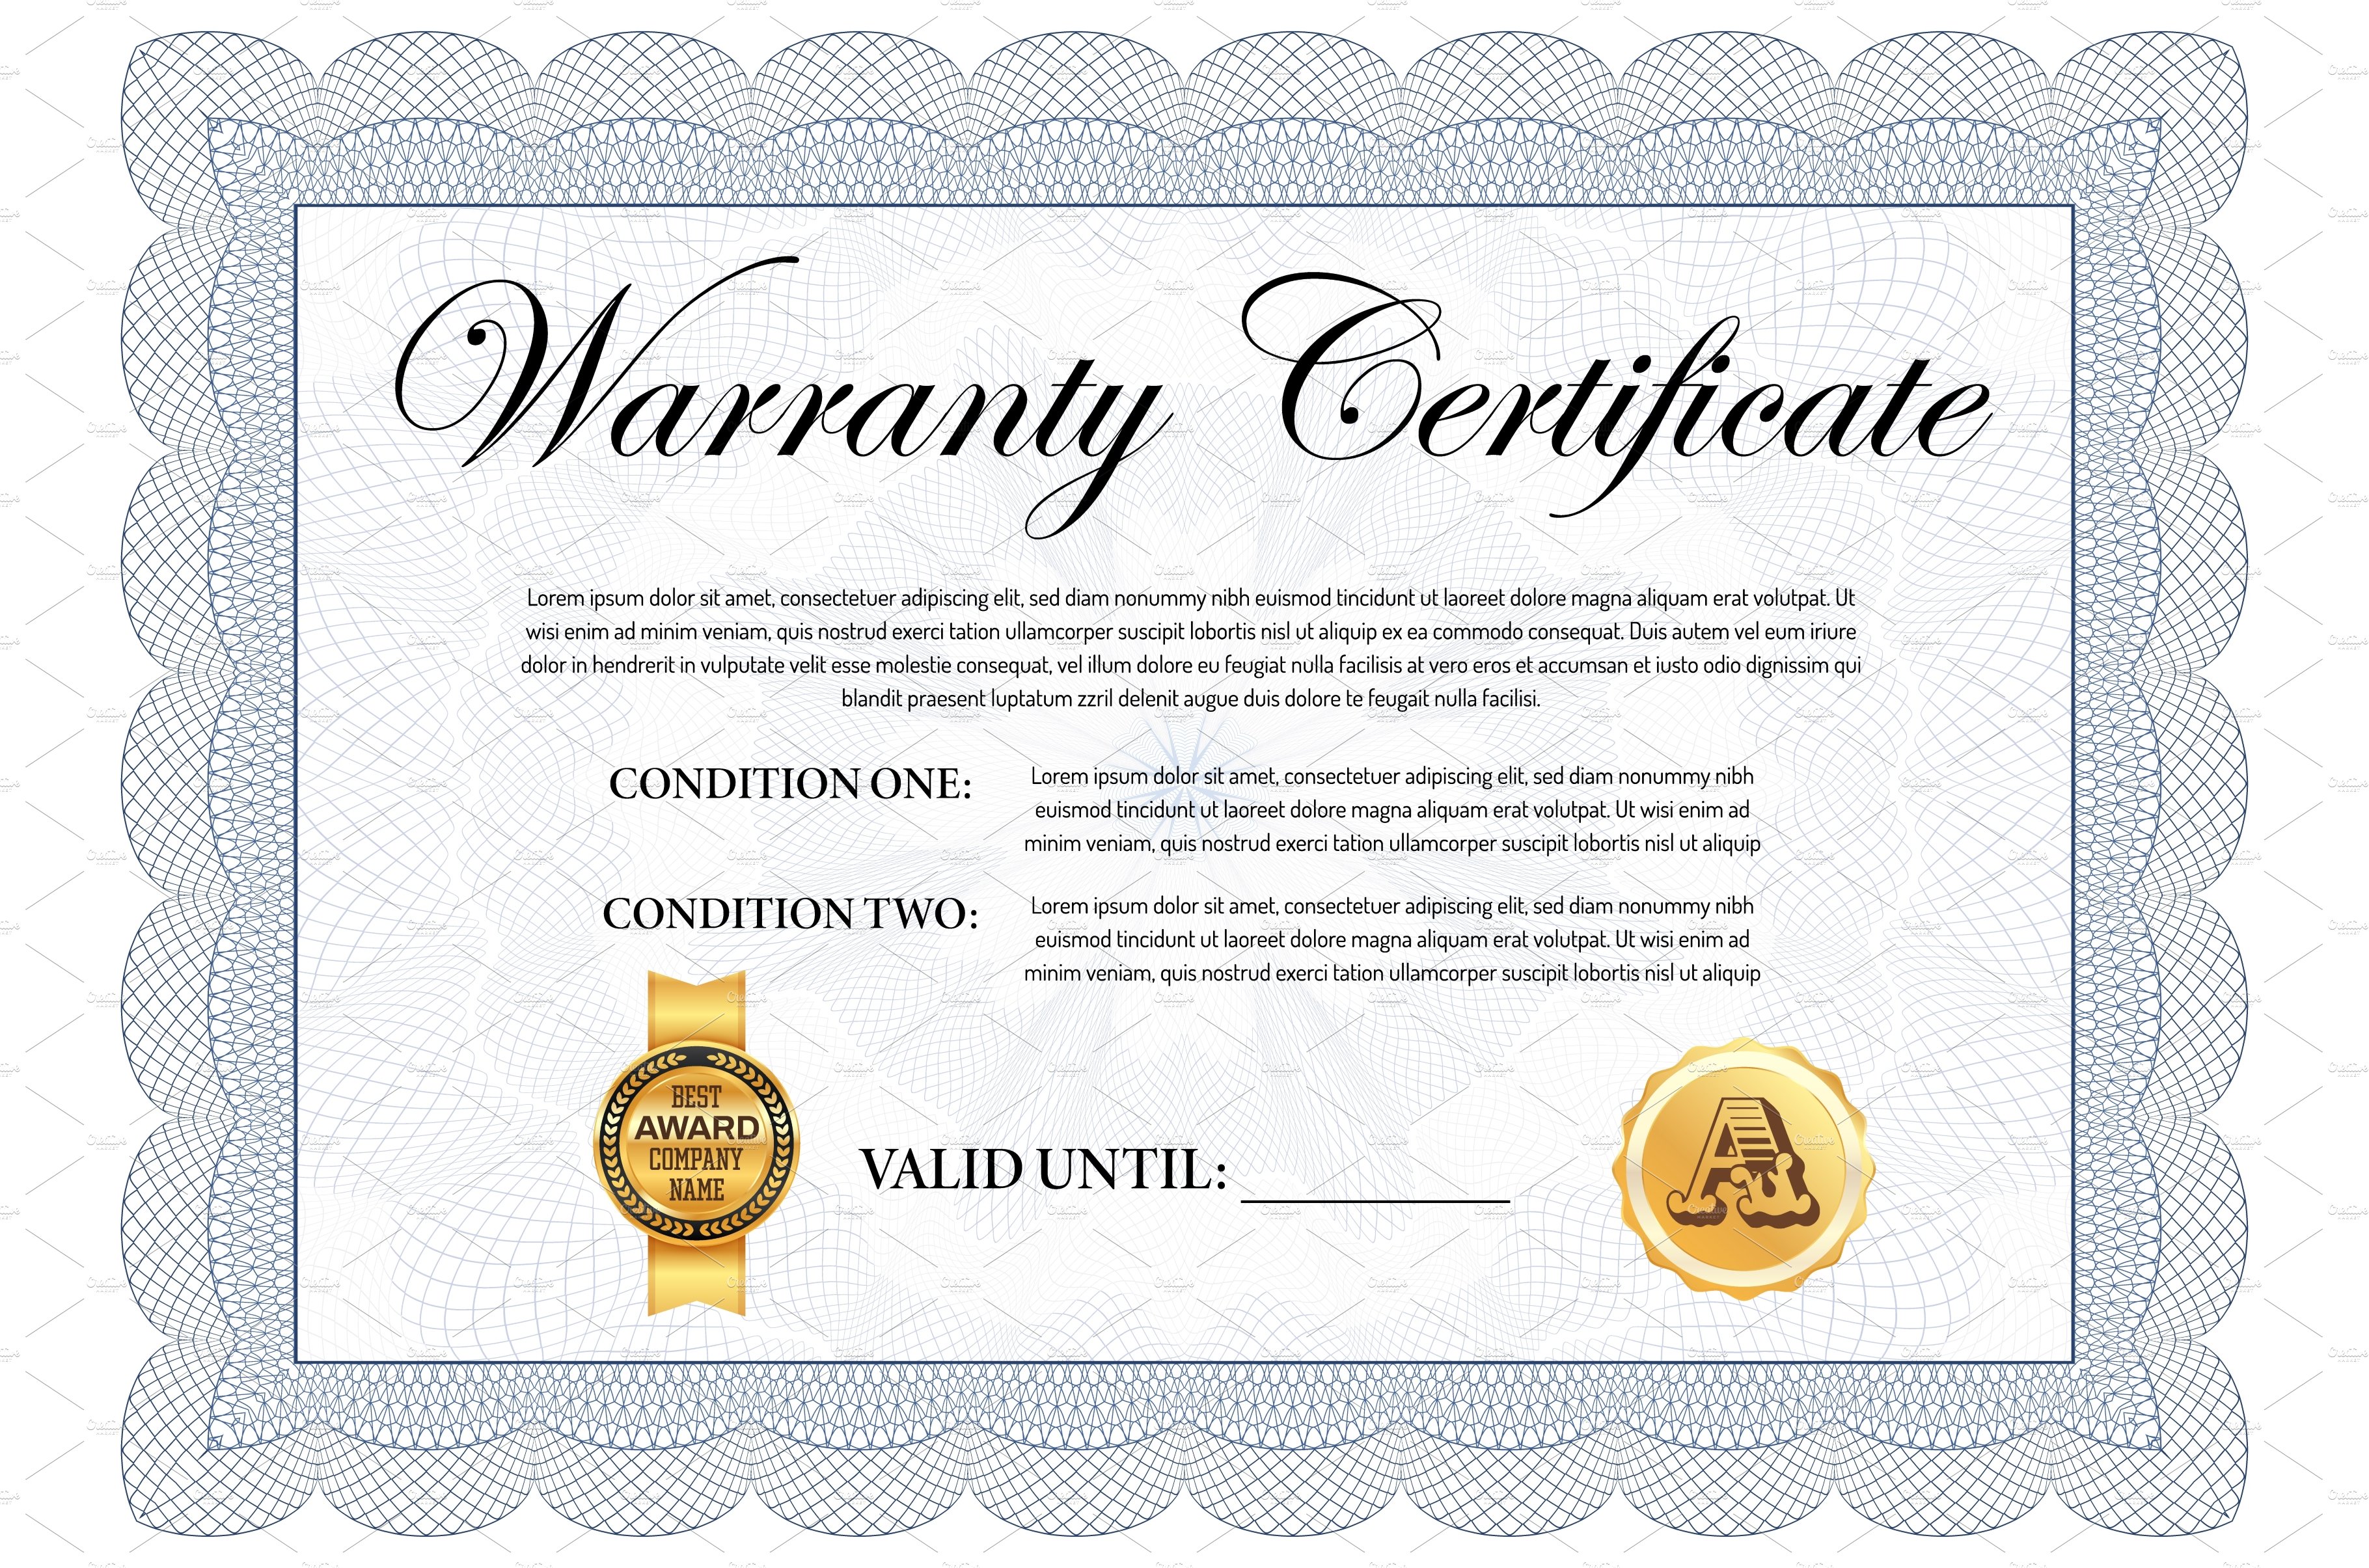 Company quality warranty certificate cover image.